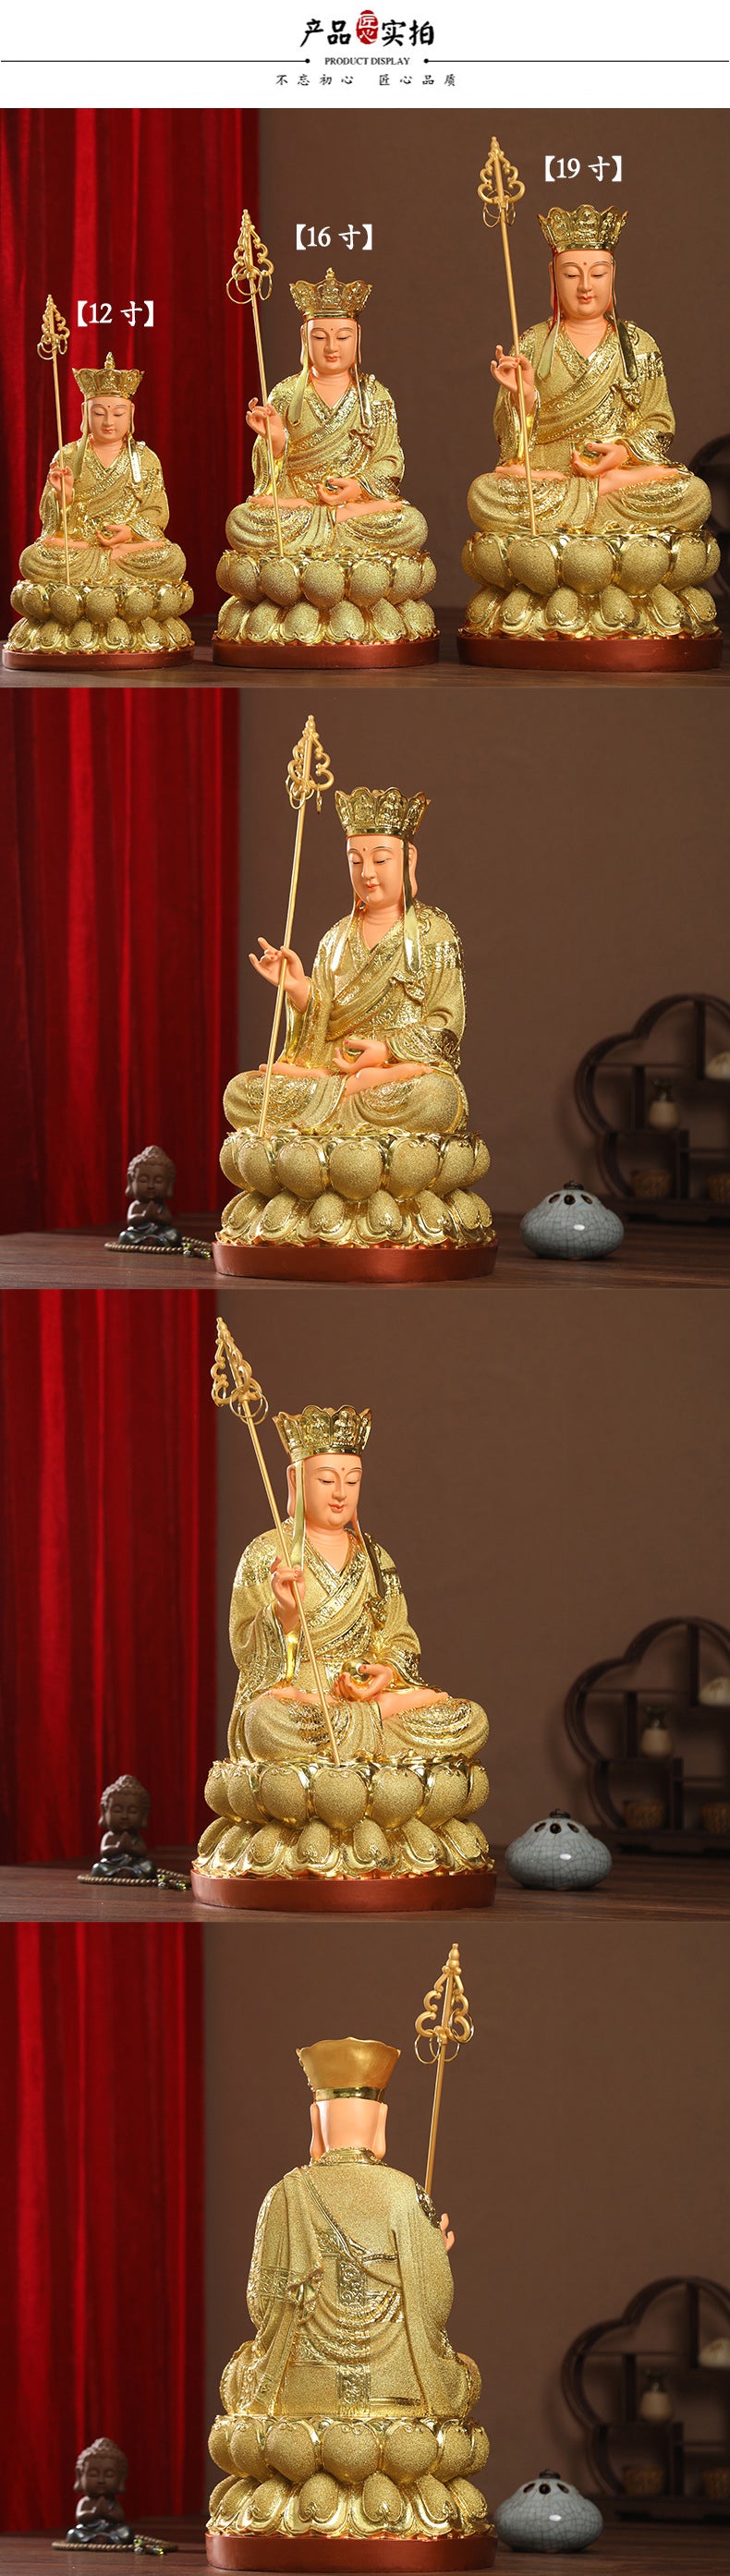 Earth Treasury, Buddha ksitigarbha Statue for Sale, Sand Gold Resin Material, Offerings Product Detail Statement-3